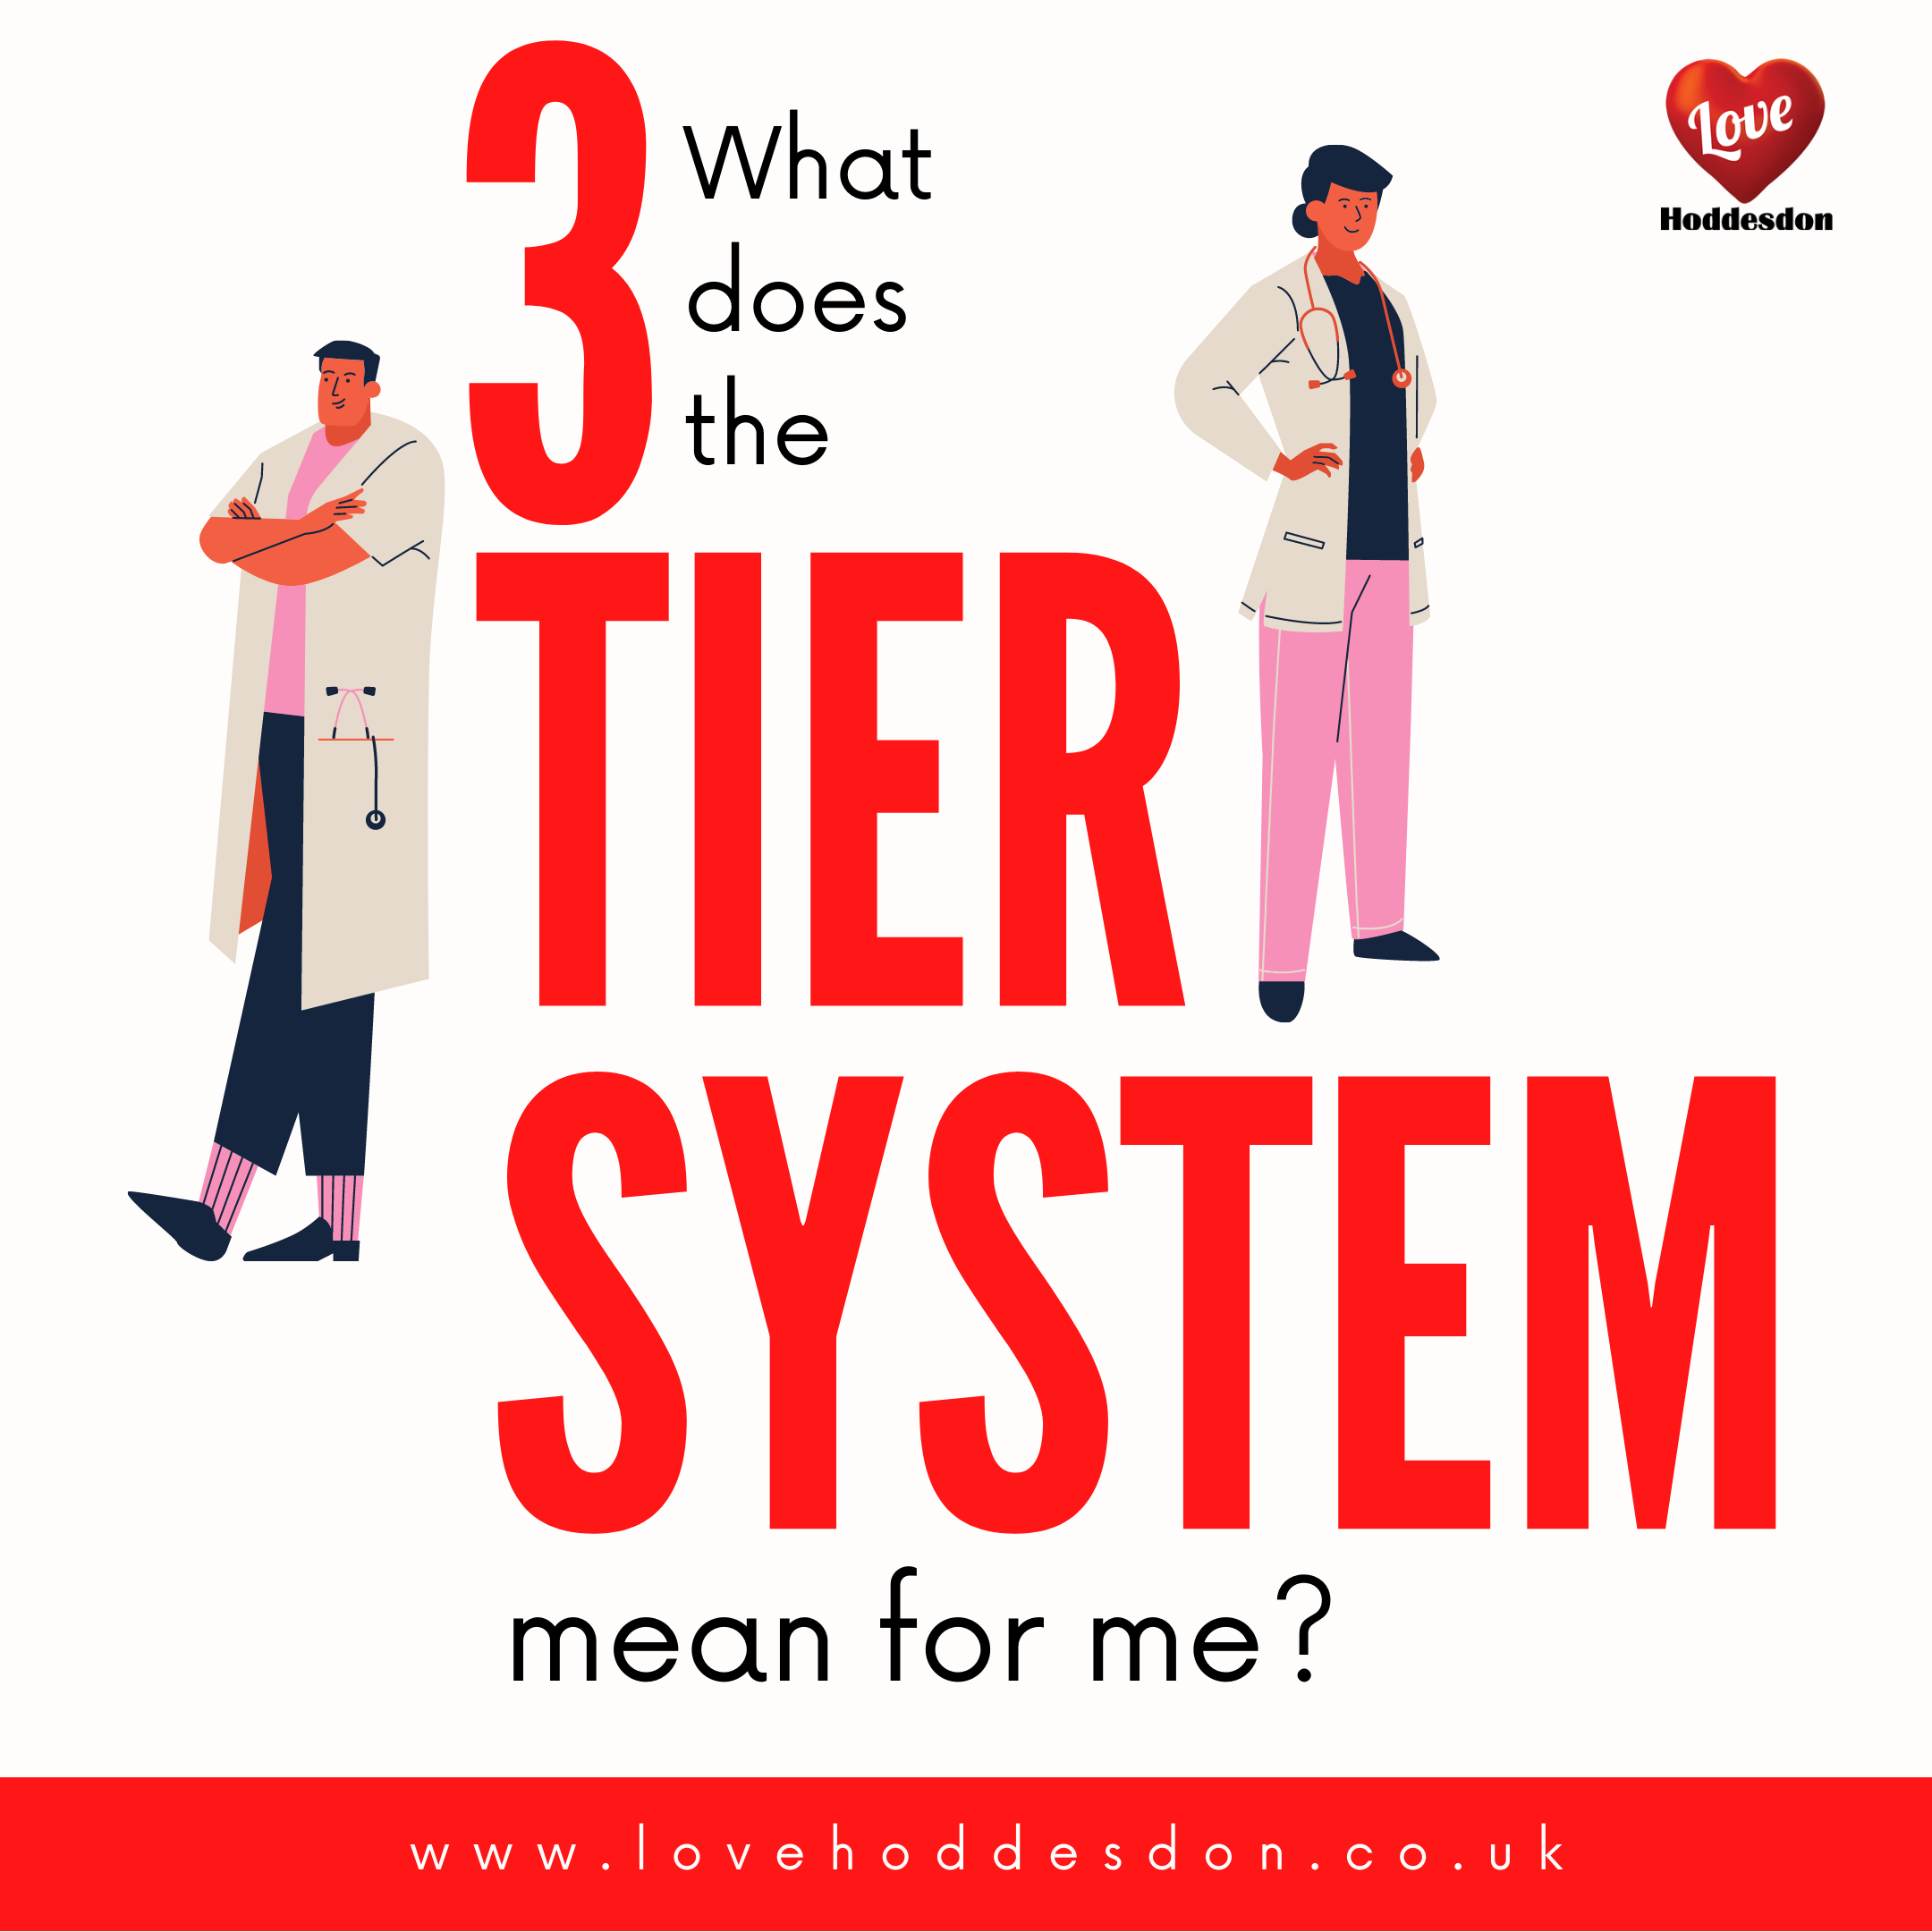 What does the 3 tier system mean for me?